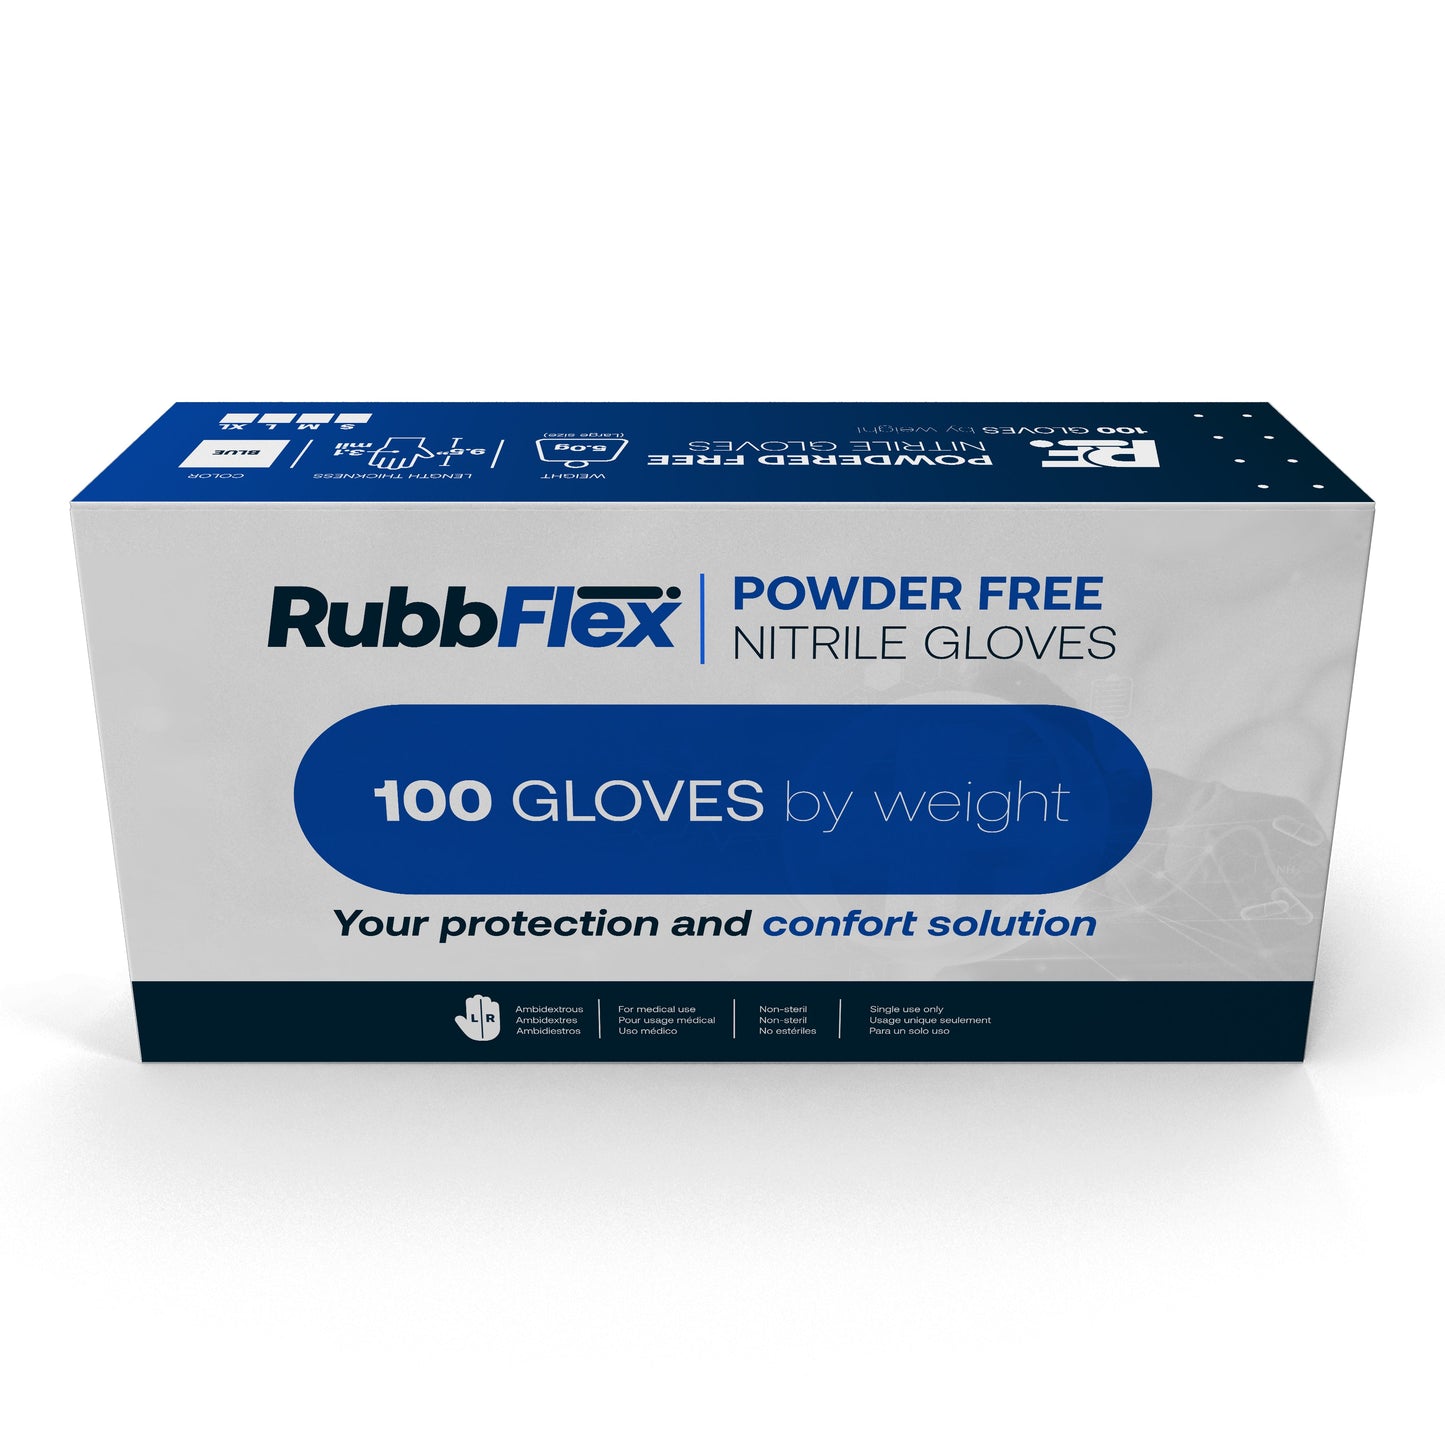 Rubbflex Nitrile Powder Free Disposable Gloves RNT100S - Medical Exam Grade - 3.1 mil Thick (Pack of 100) SMALL